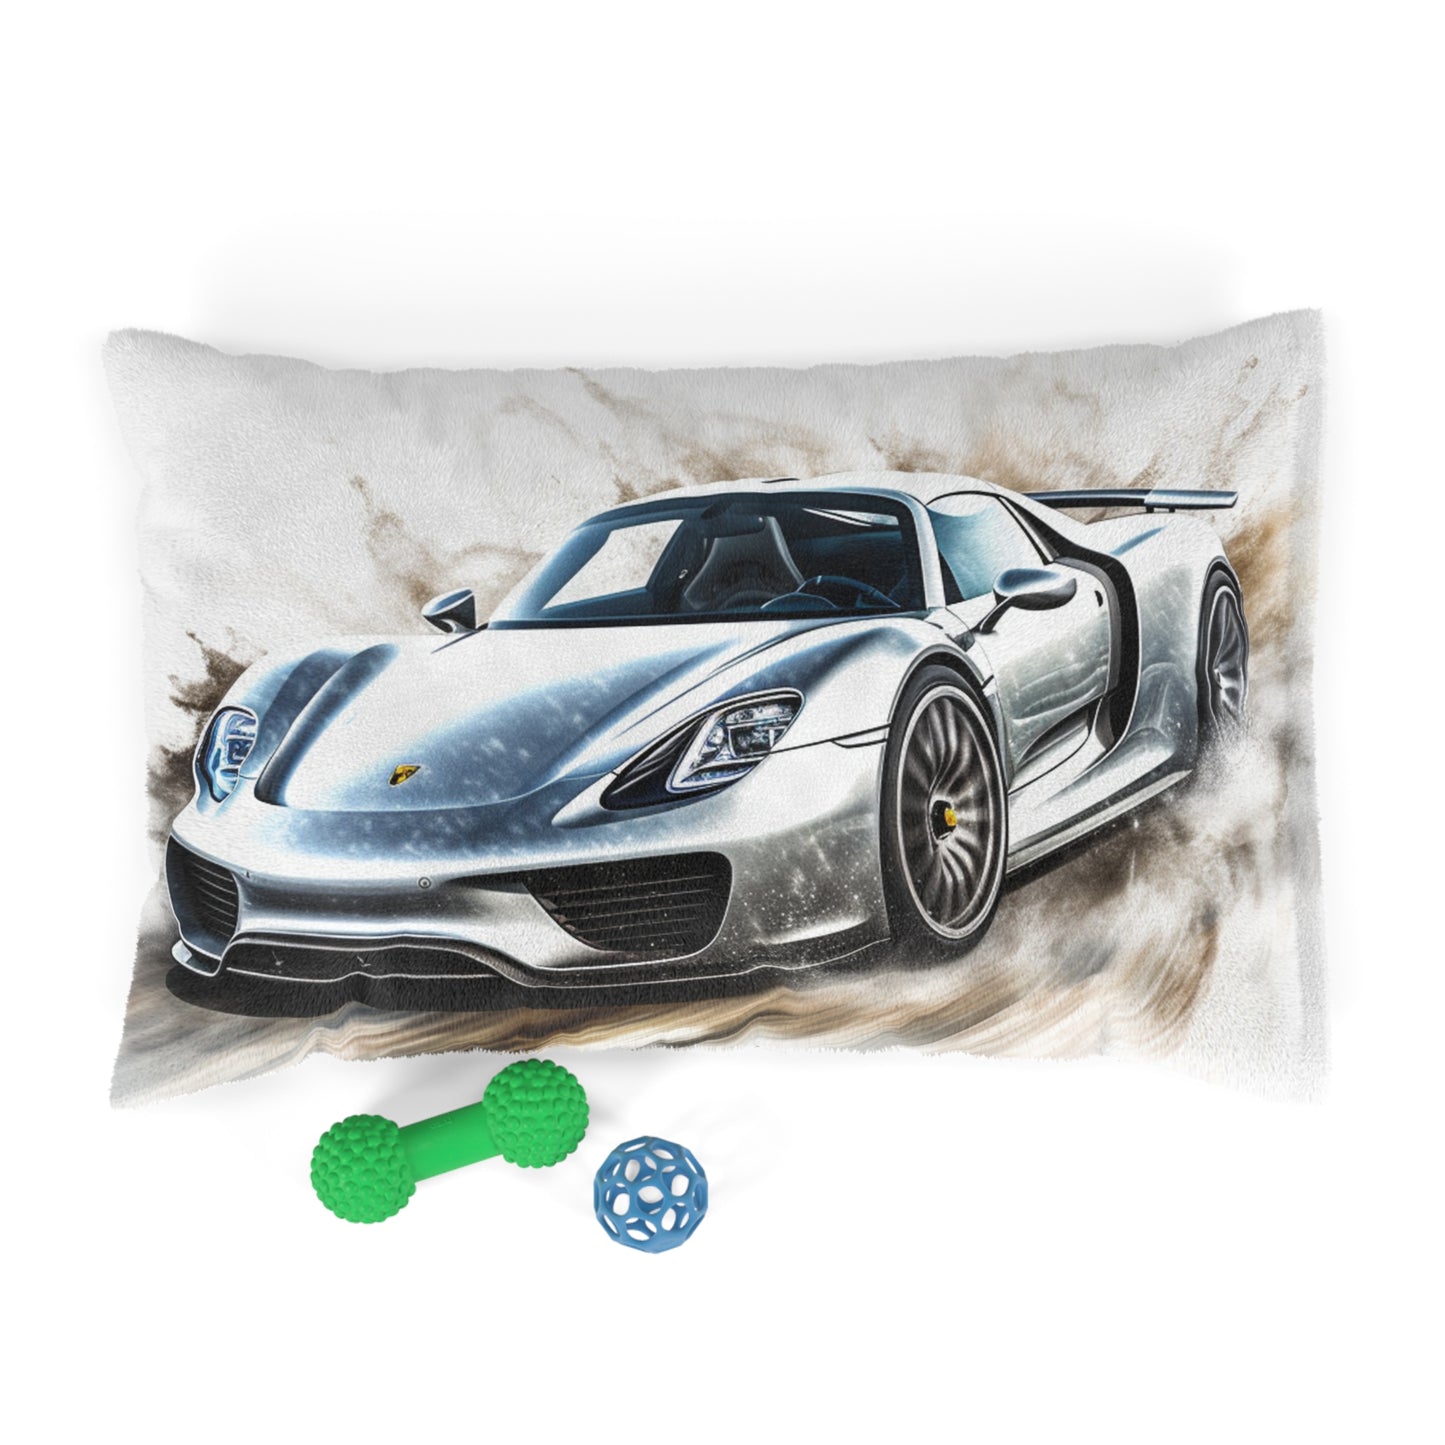 Pet Bed 918 Spyder white background driving fast with water splashing 2